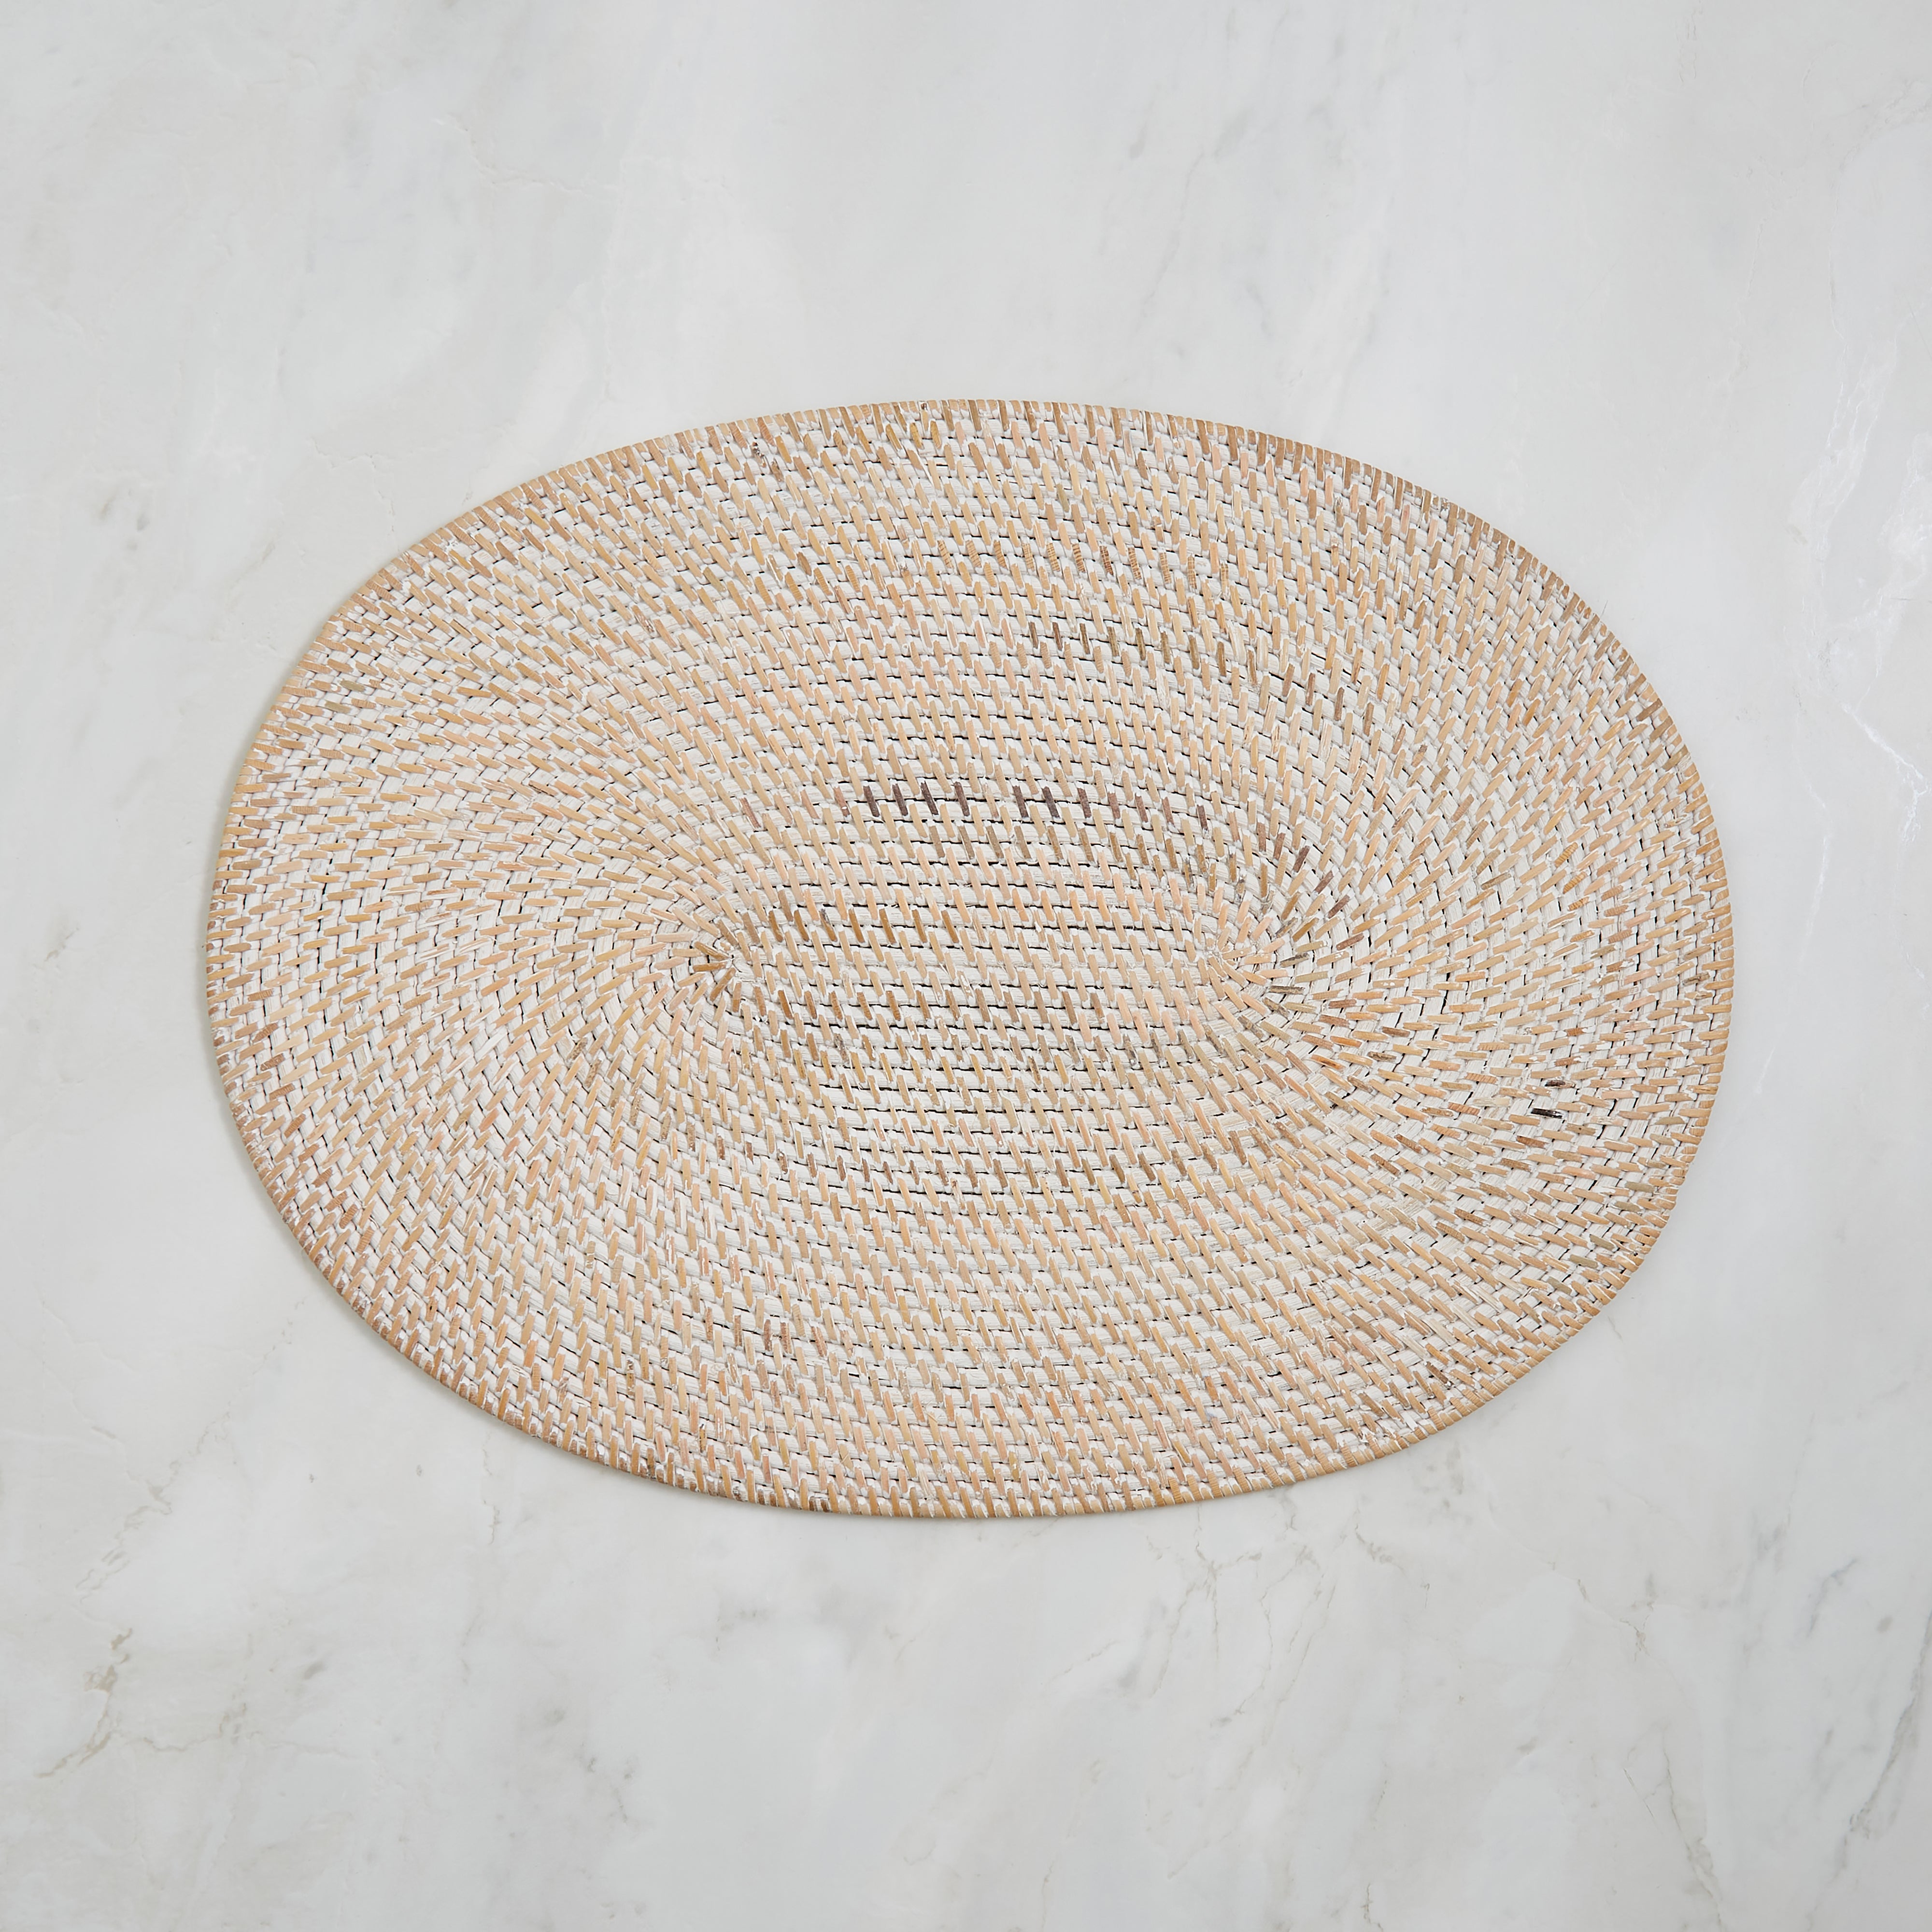 Churchgate Woven Rattan Oval Placemat